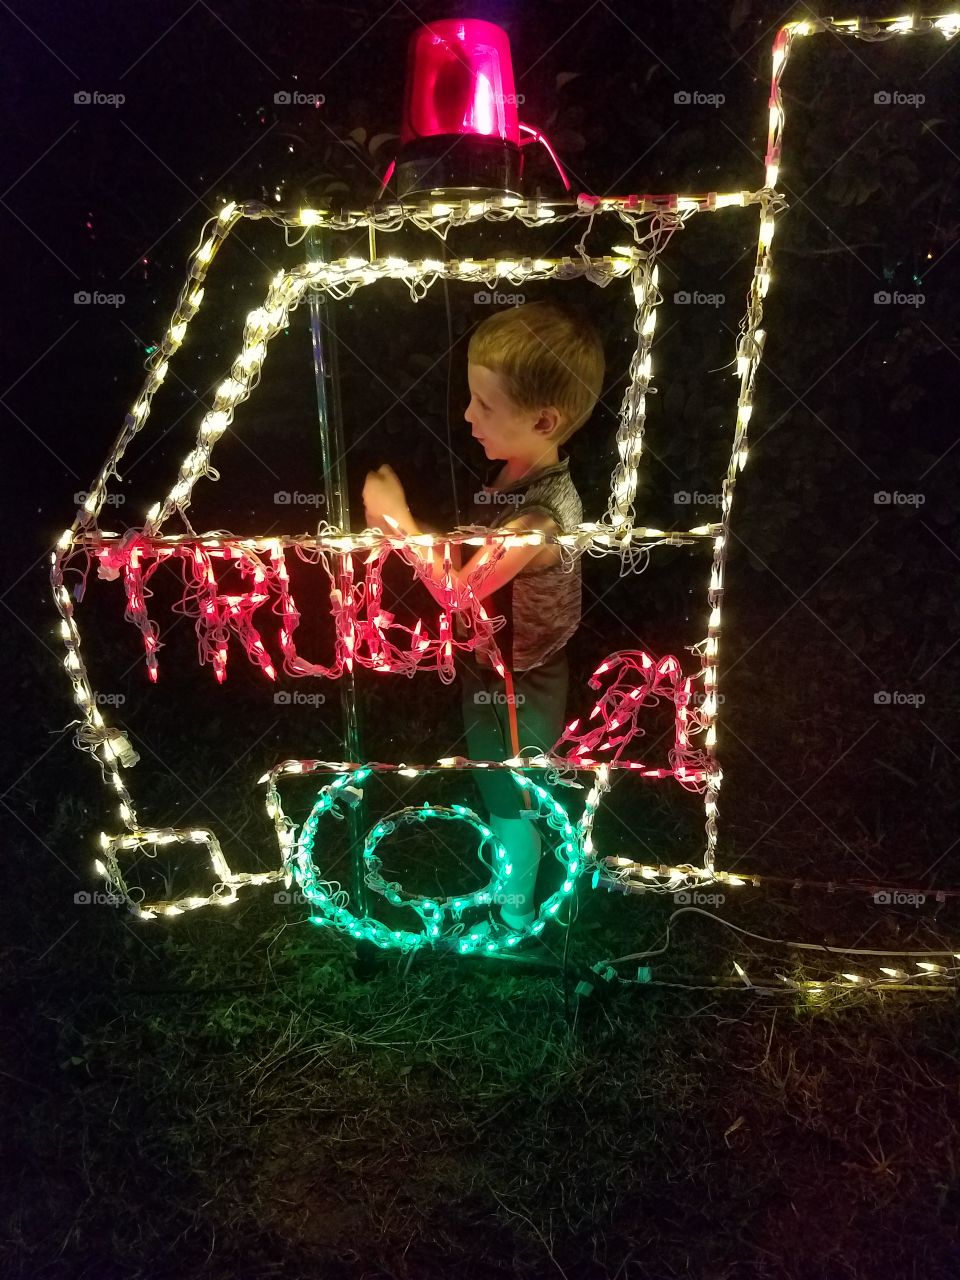 Having some fun with awesome Christmas lights.